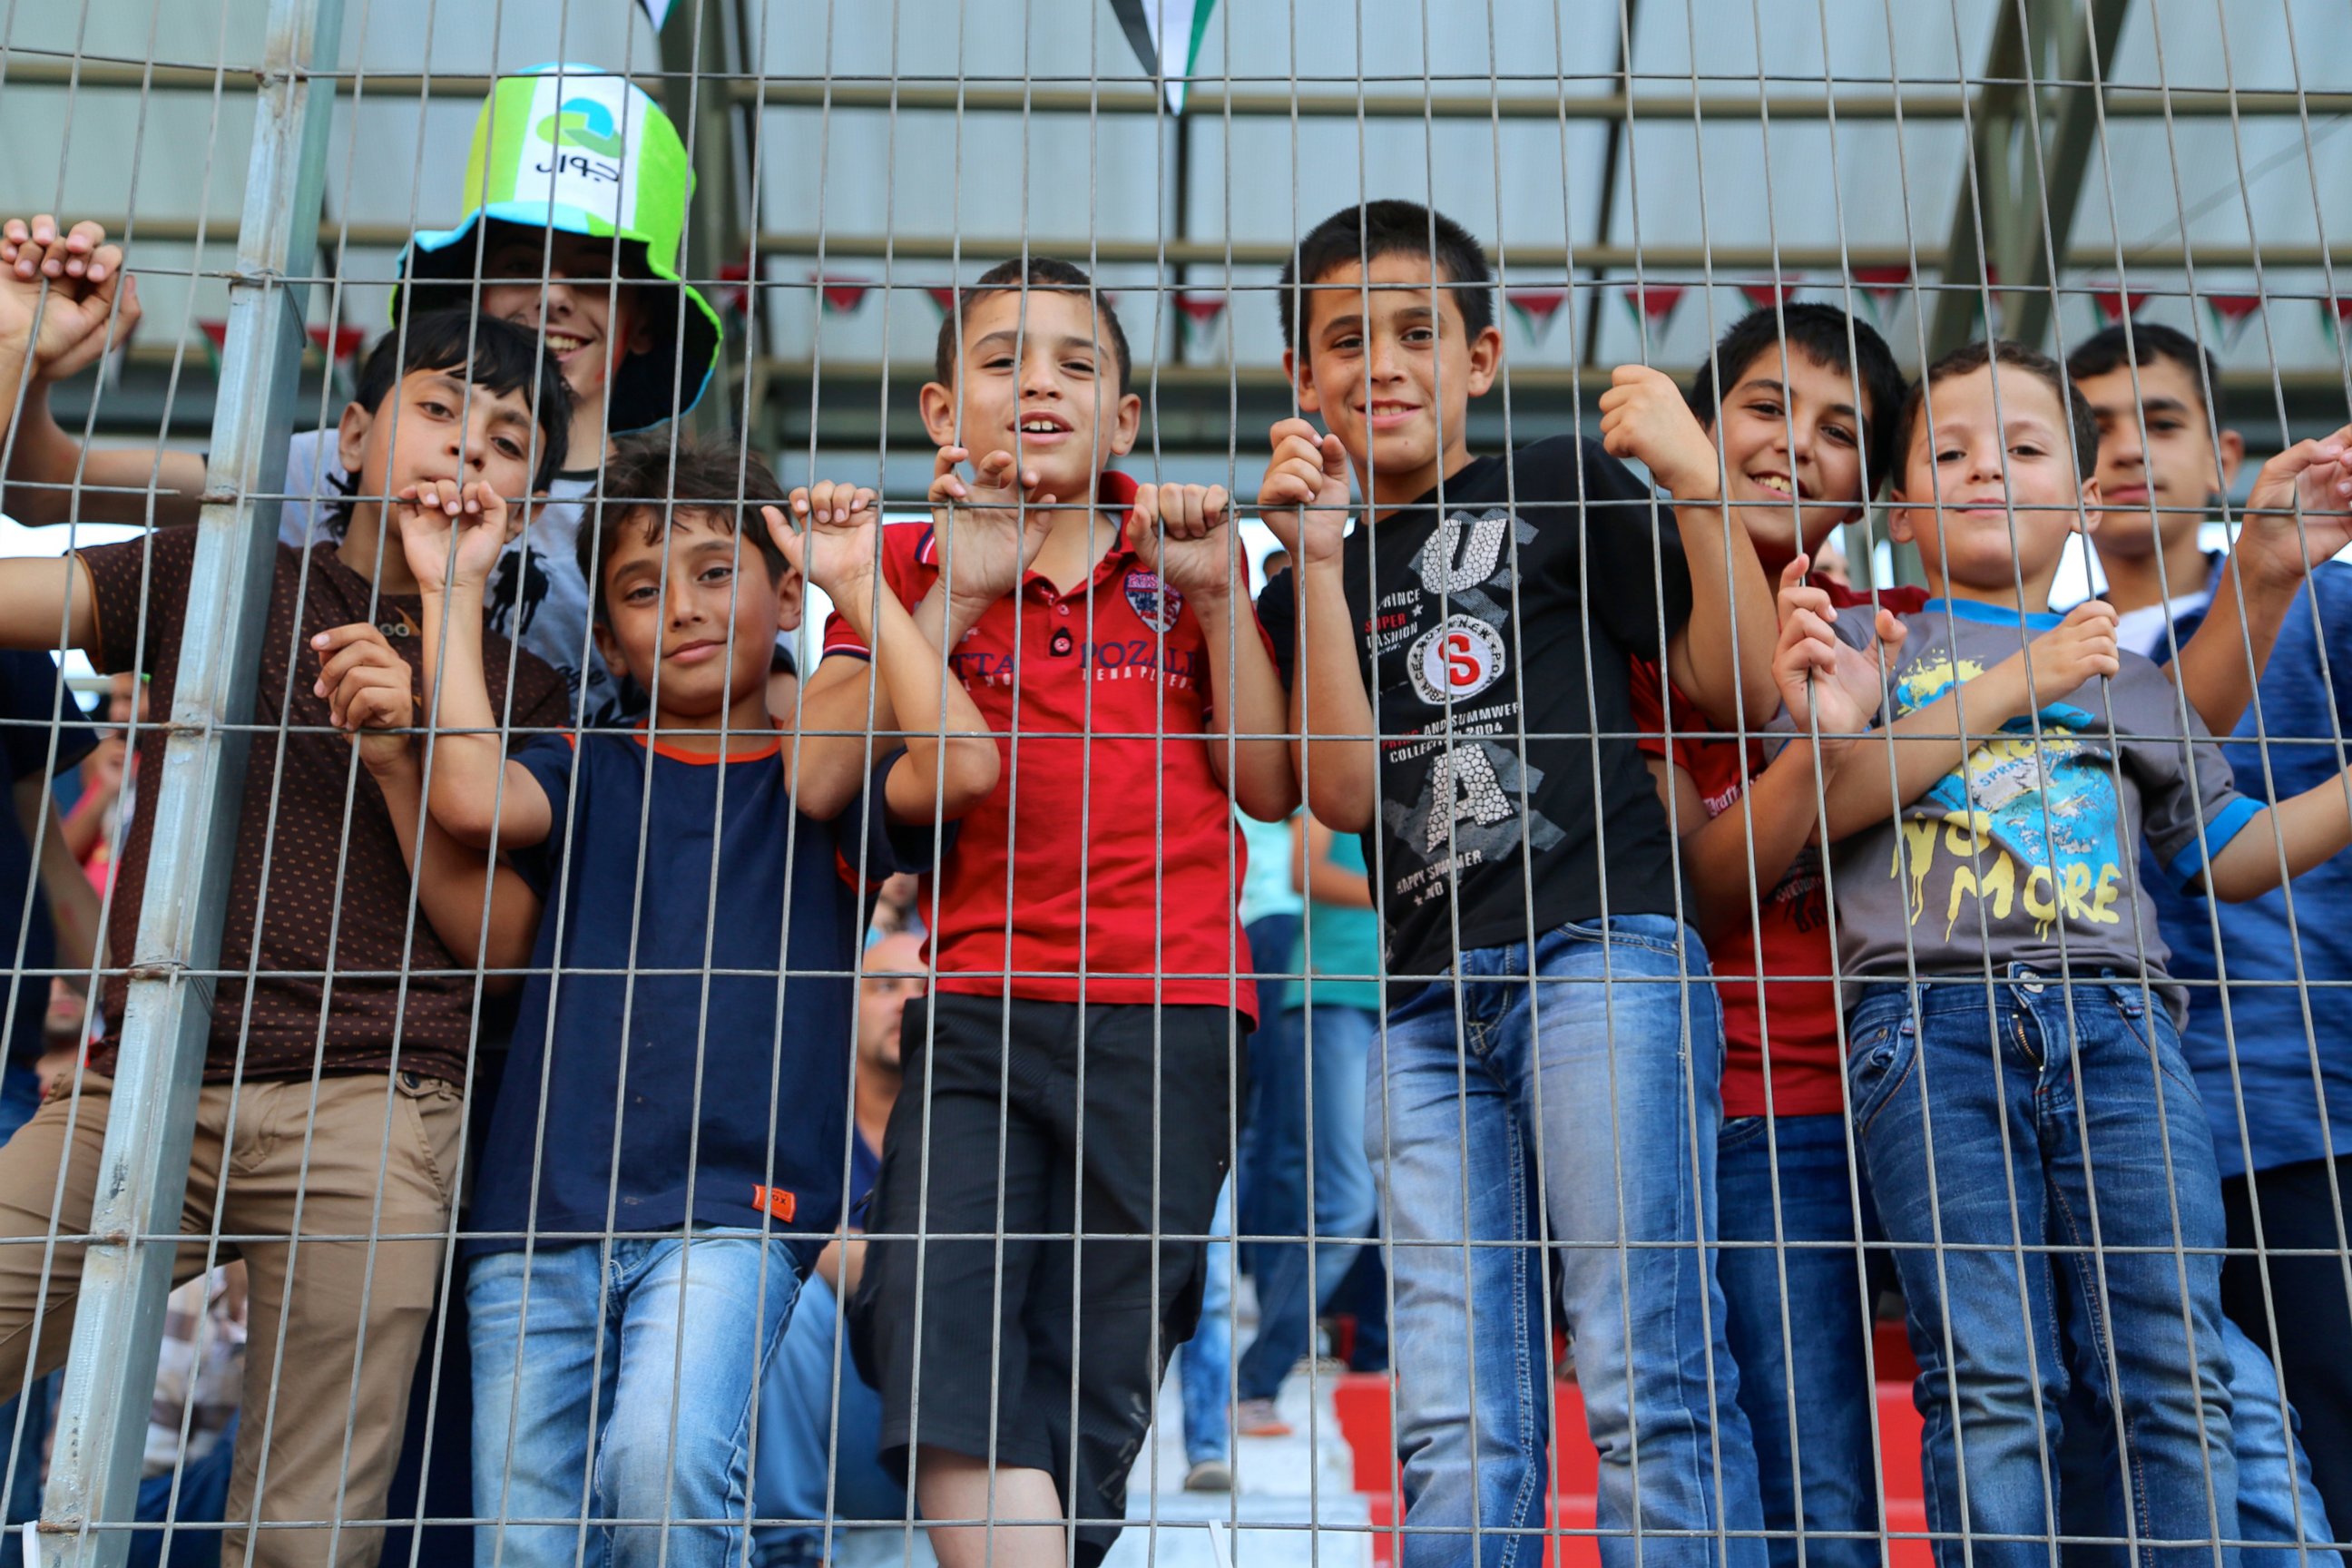 Young football fans in the stands at the Palestine Cup final match.